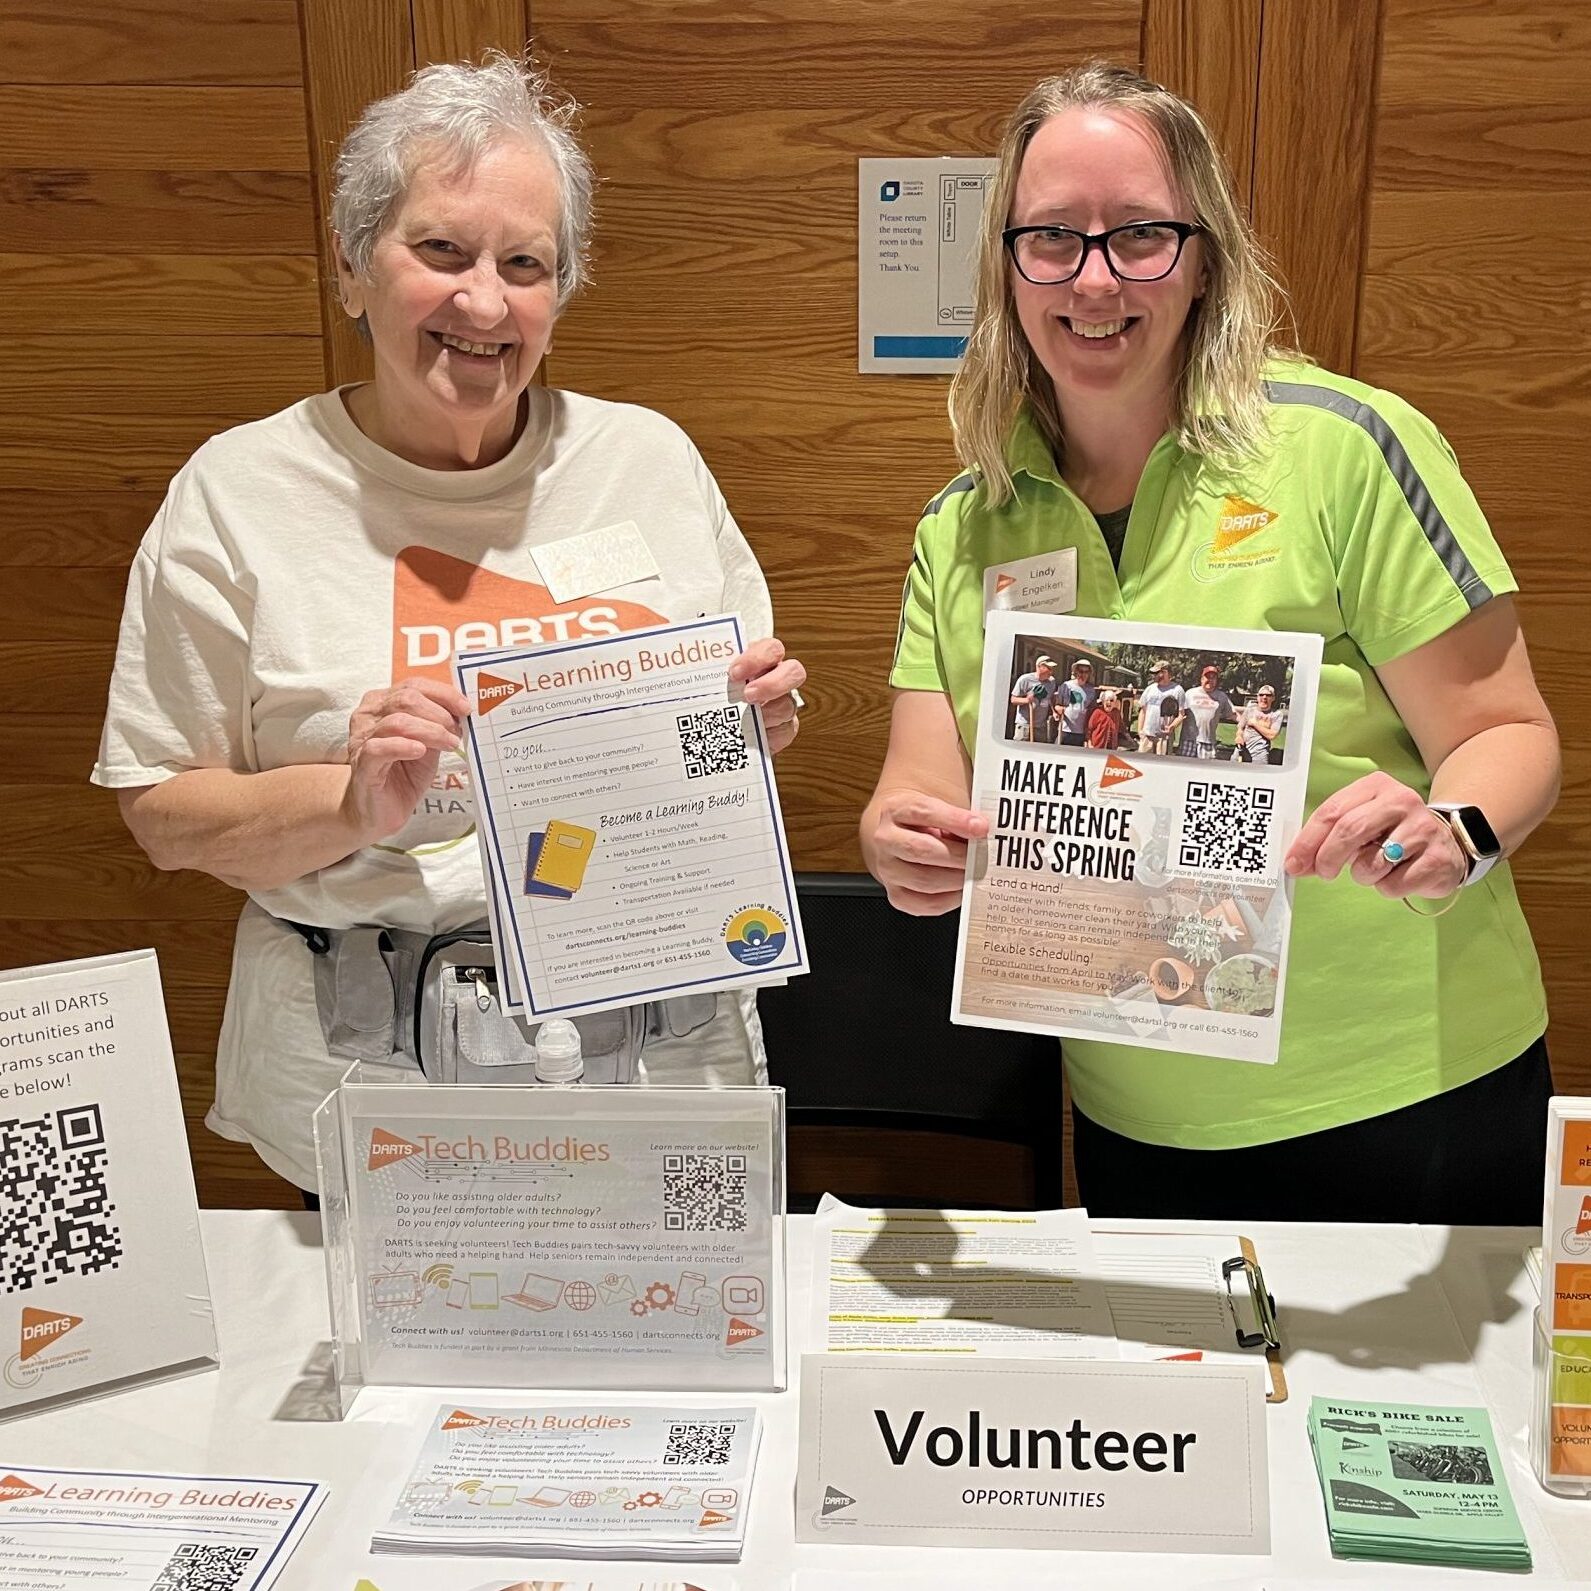 HEART + HANDS = CONNECTIONS: The Strength of Volunteering